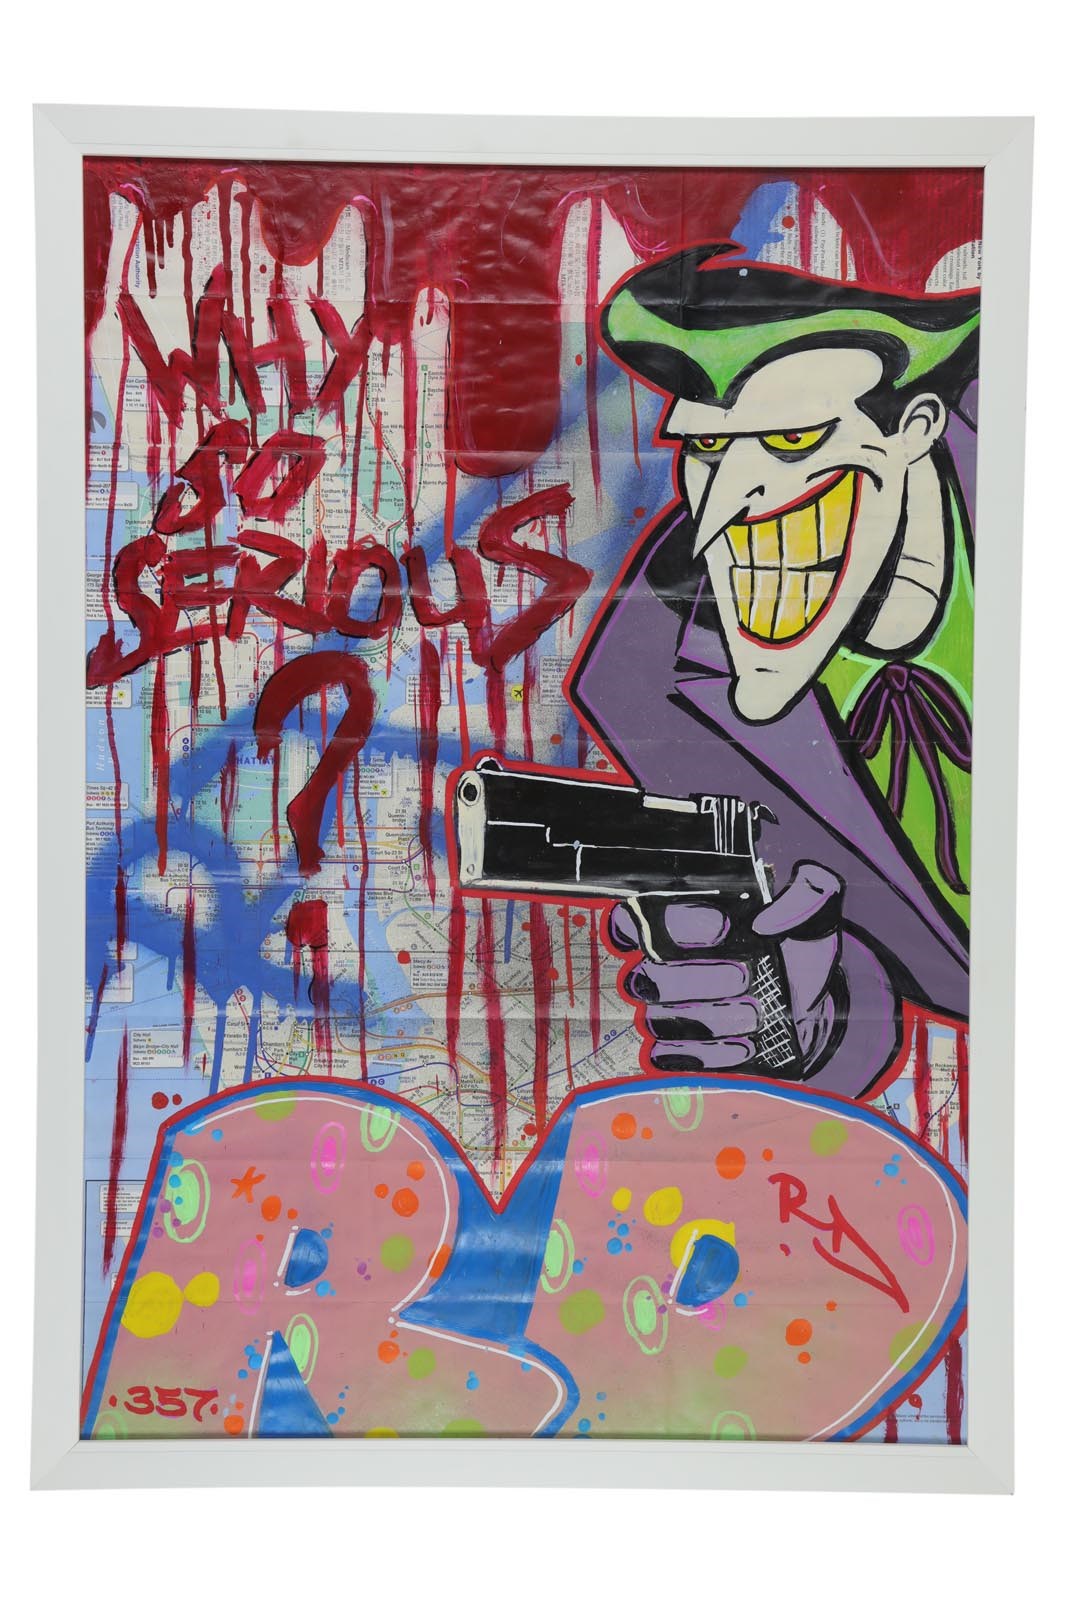 Rock And Pop Culture - The Joker "Why So Serious?" Original Painting by Robert Dwyer